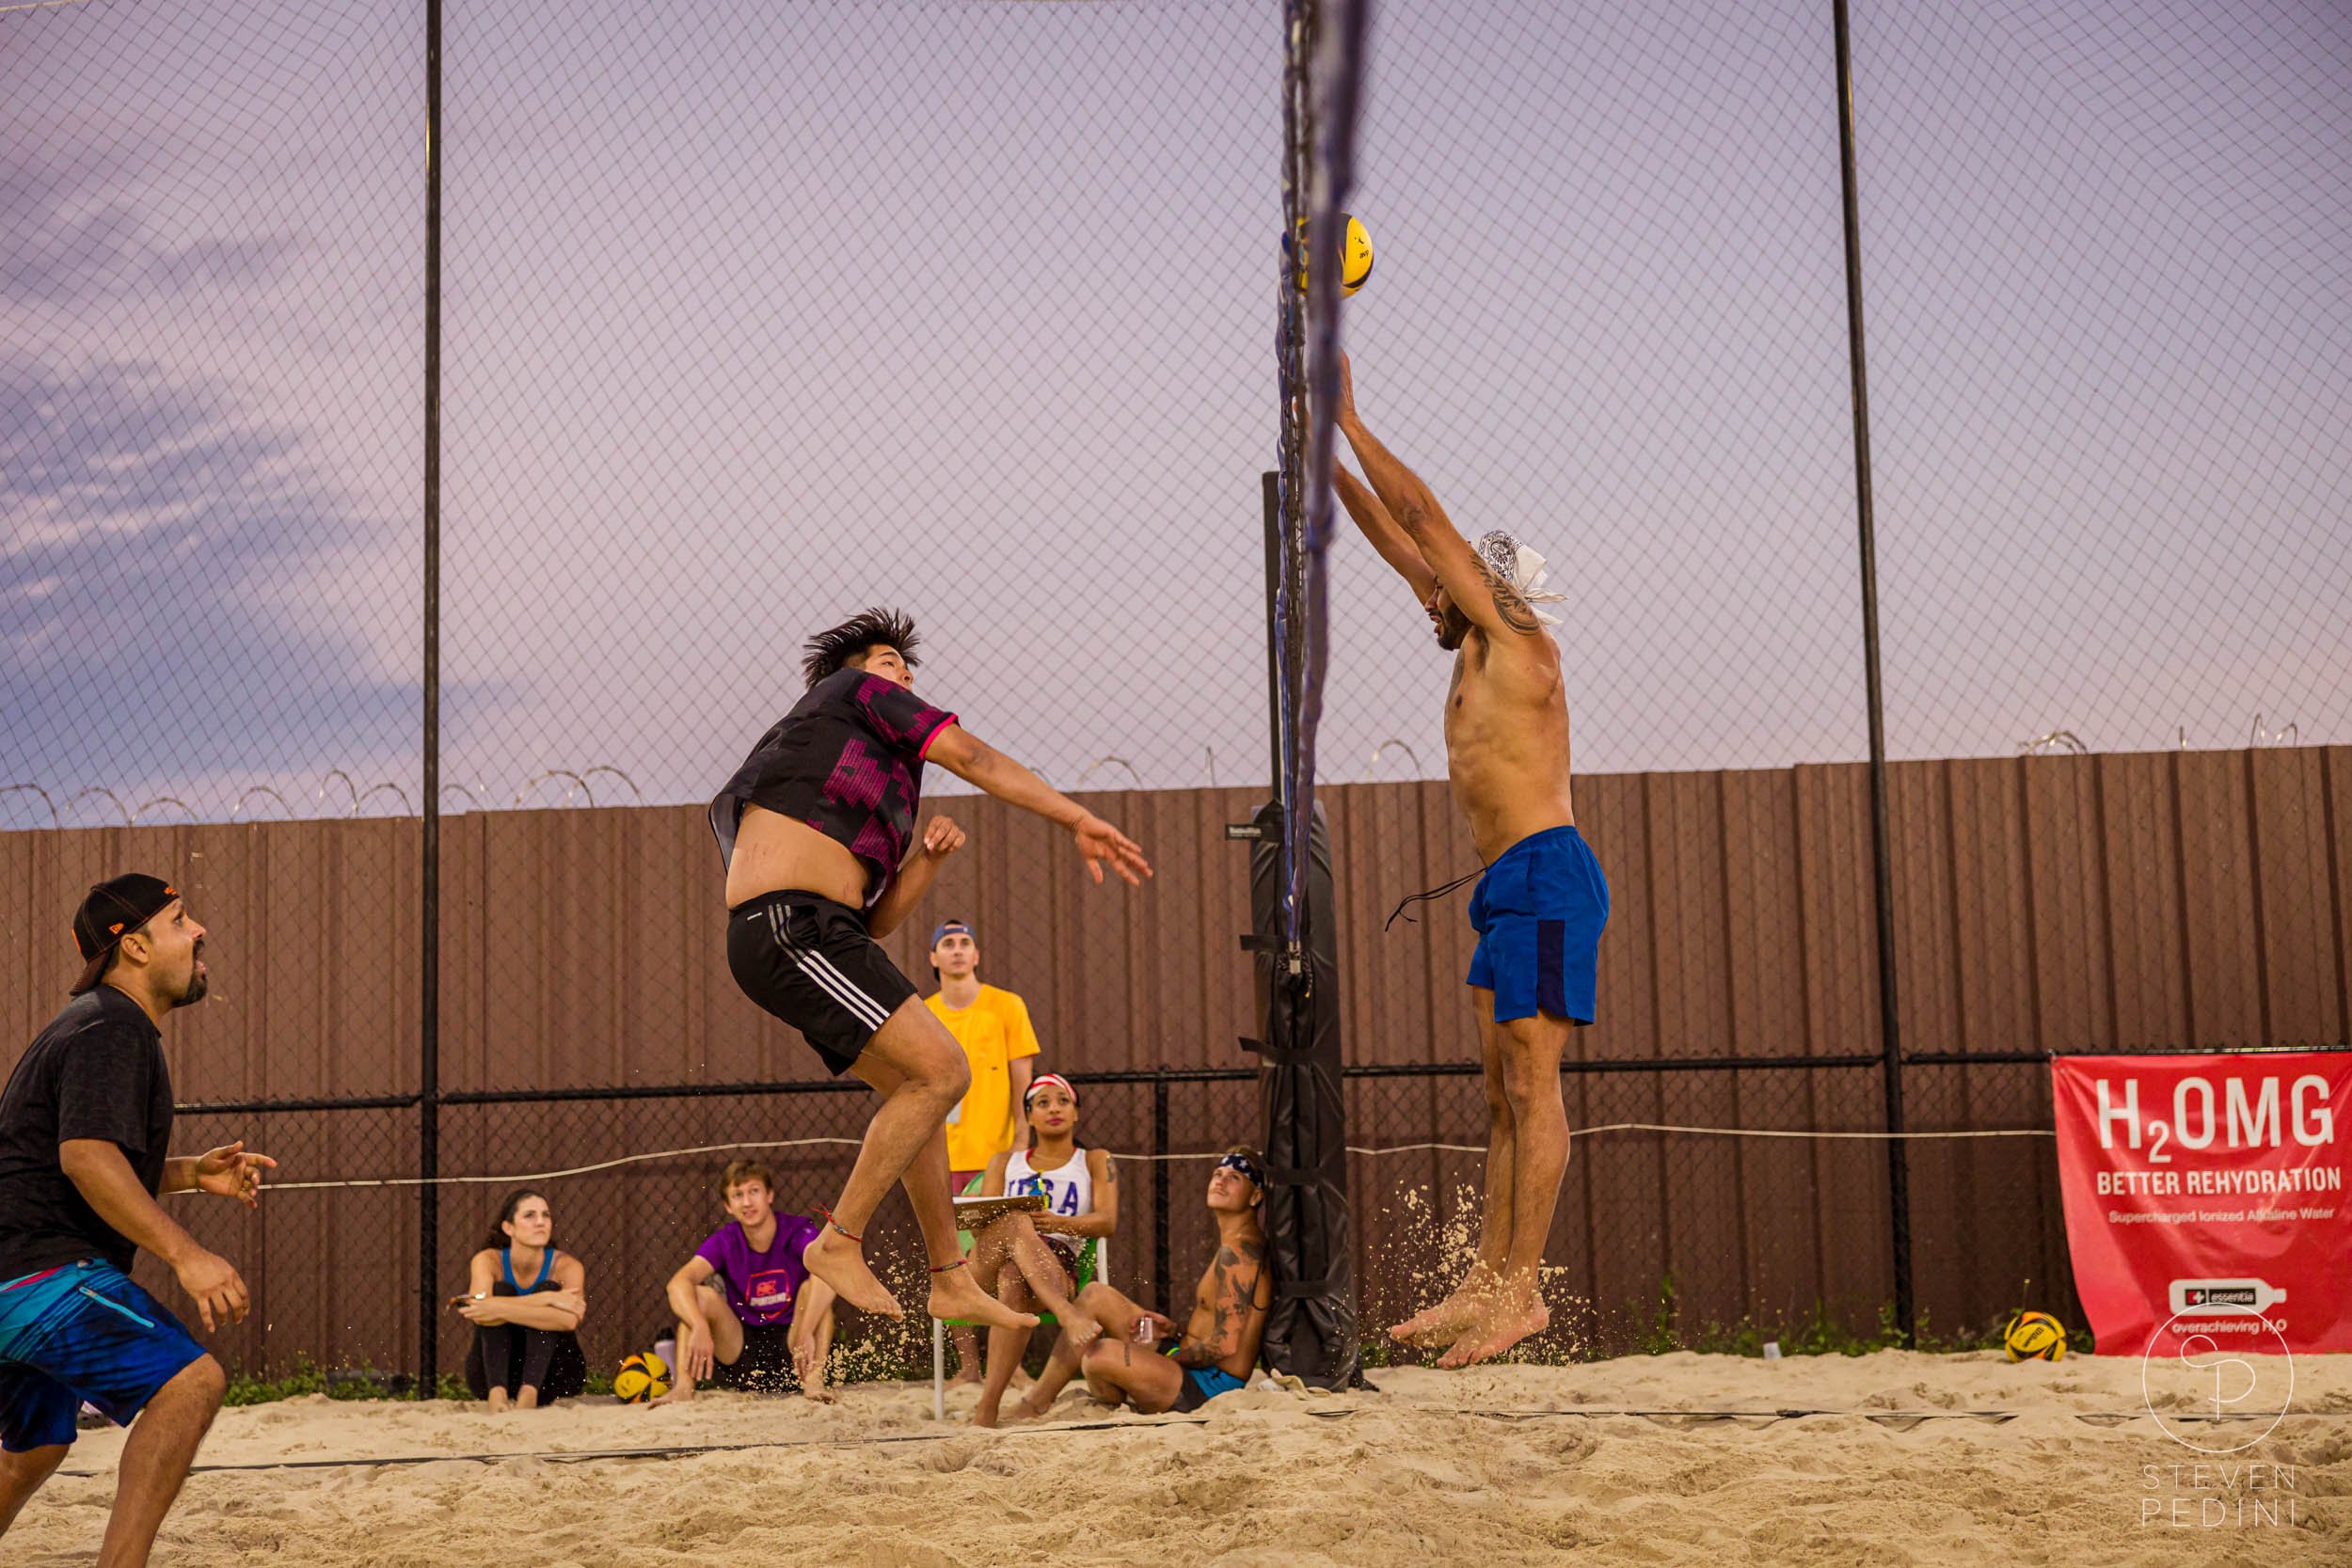 Steven Pedini Photography - Bumpy Pickle - Sand Volleyball - Houston TX - World Cup of Volleyball - 00277.jpg